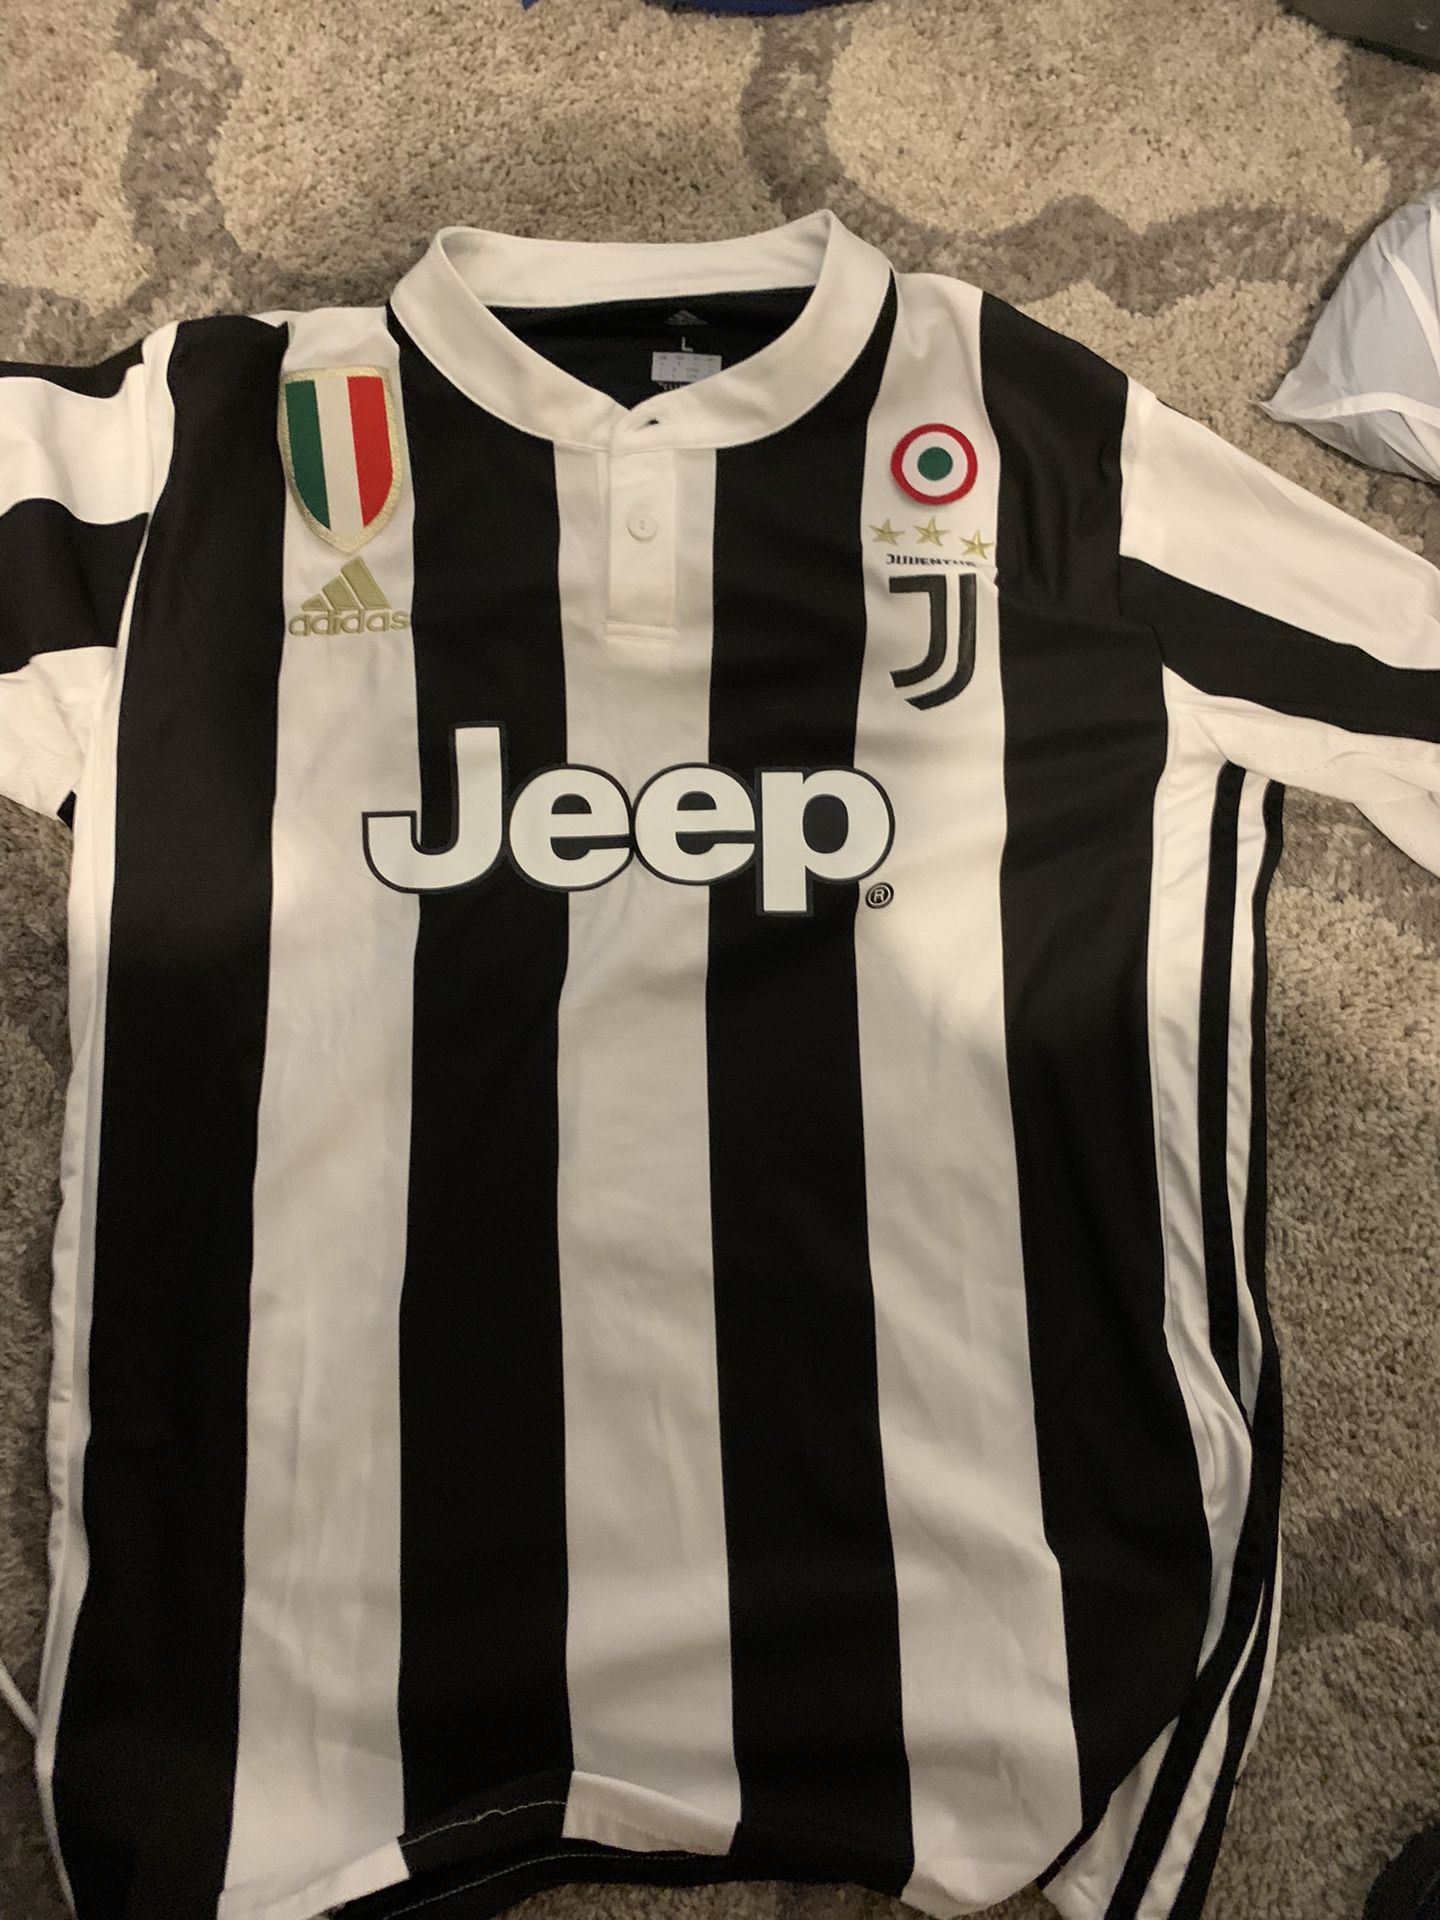 Theo Hernandez Juventus Soccer Jersey Size L for Sale in Rialto